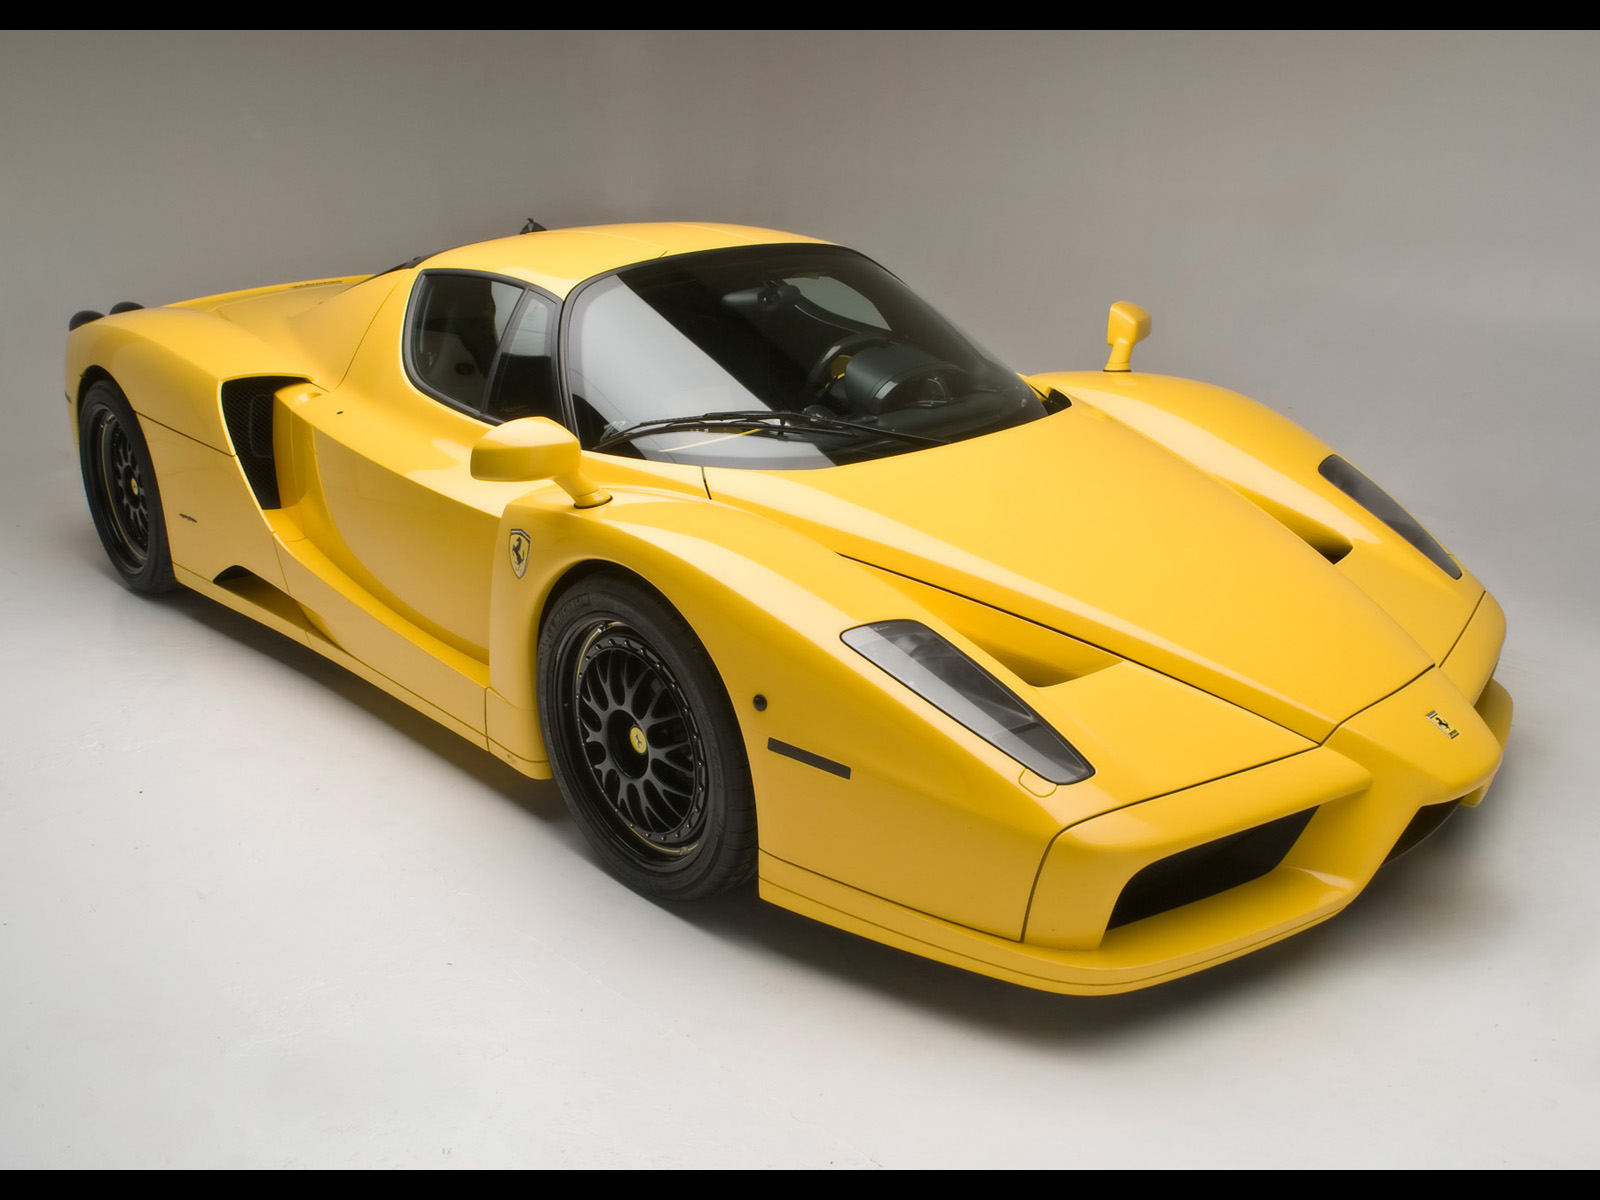 Ferrari Enzo Wallpaper Cars And Pictures Car Image